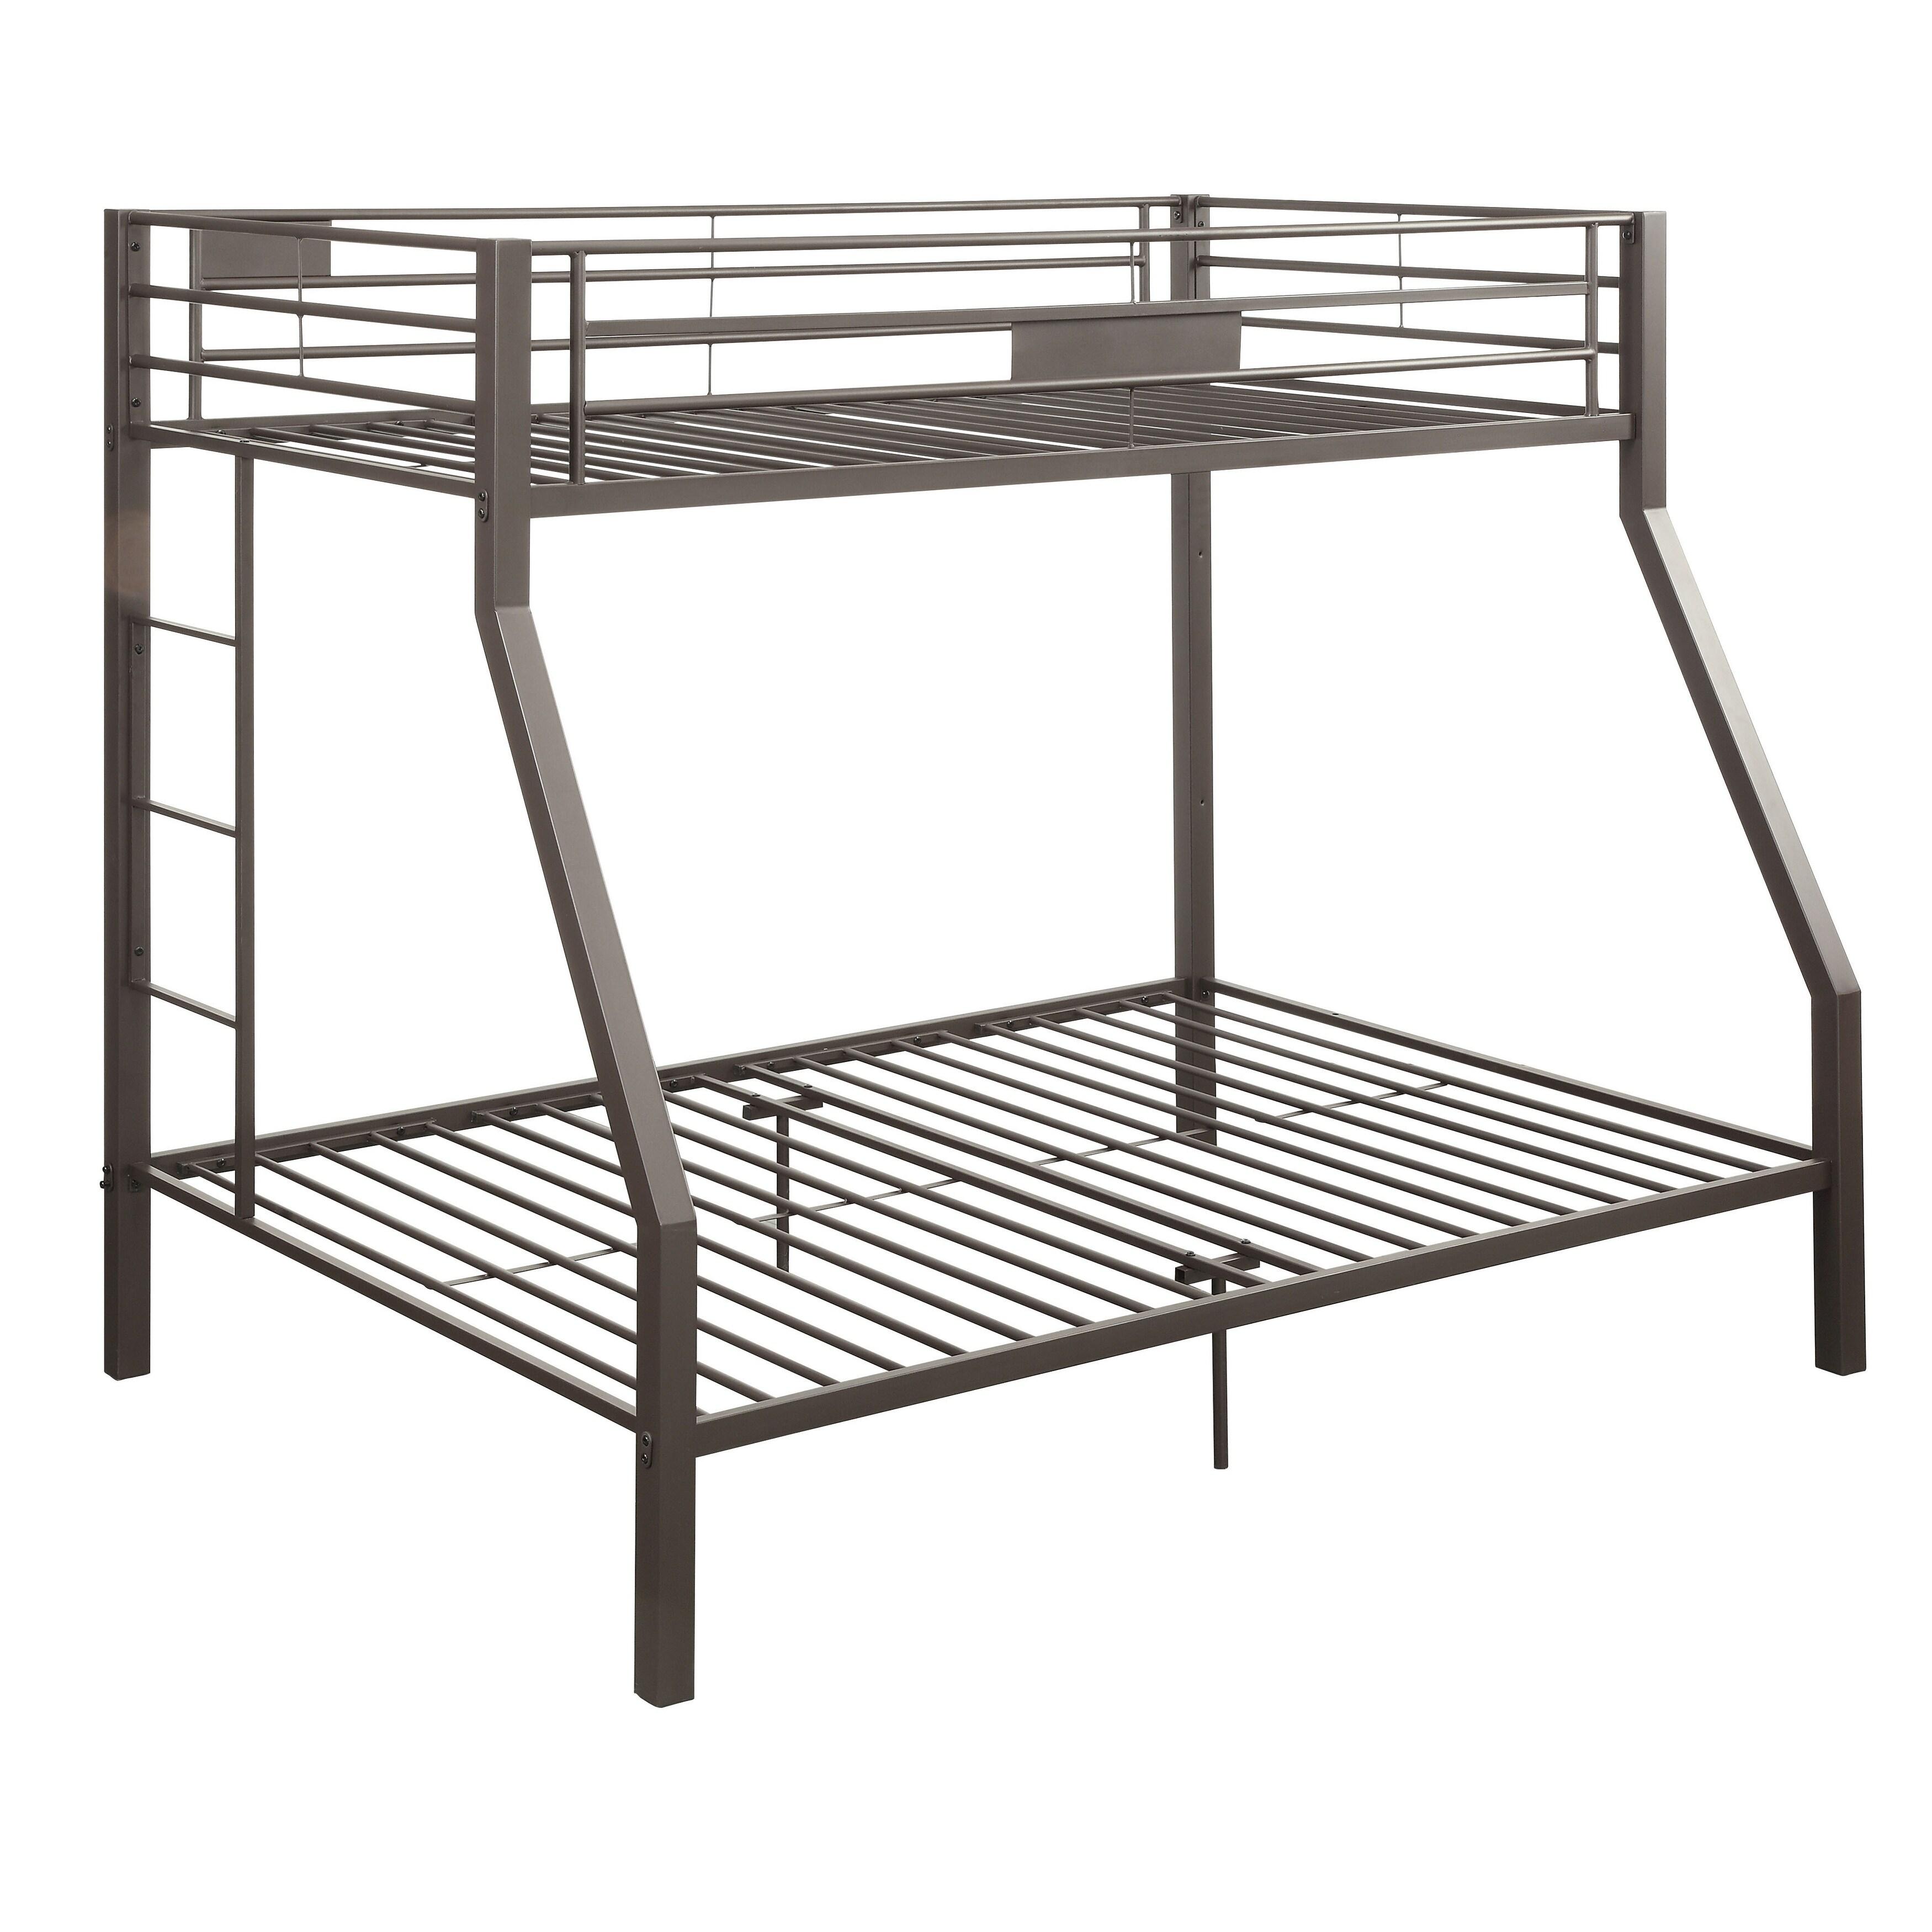 Contemporary Twin/Full Bunk Bed Limbra 37510 in Black 